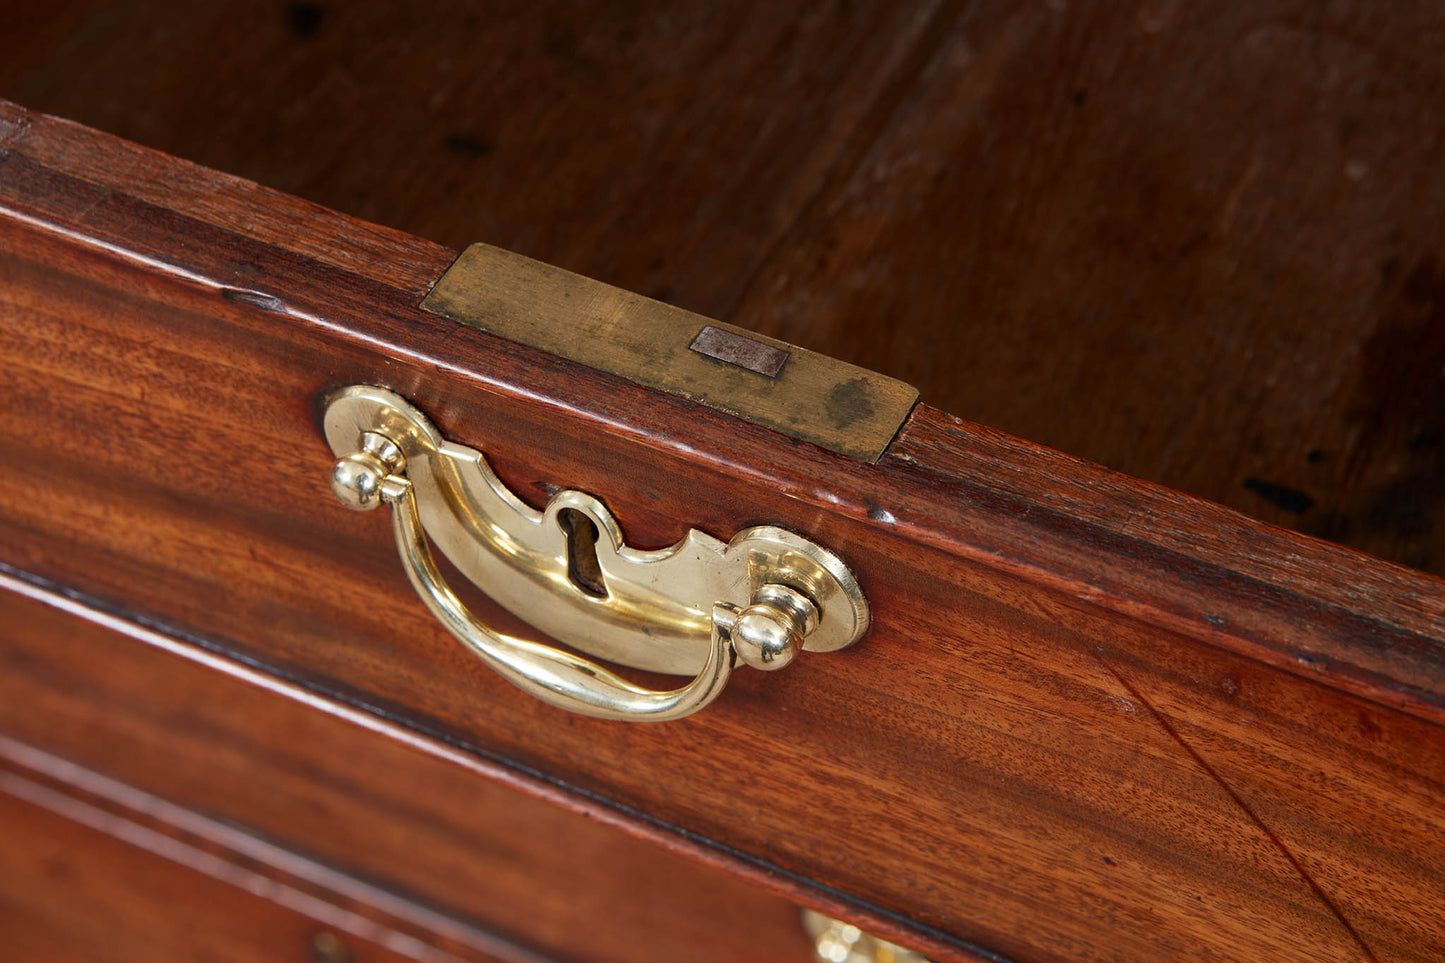 Mahogany caddy top chest of drawers circa 1760